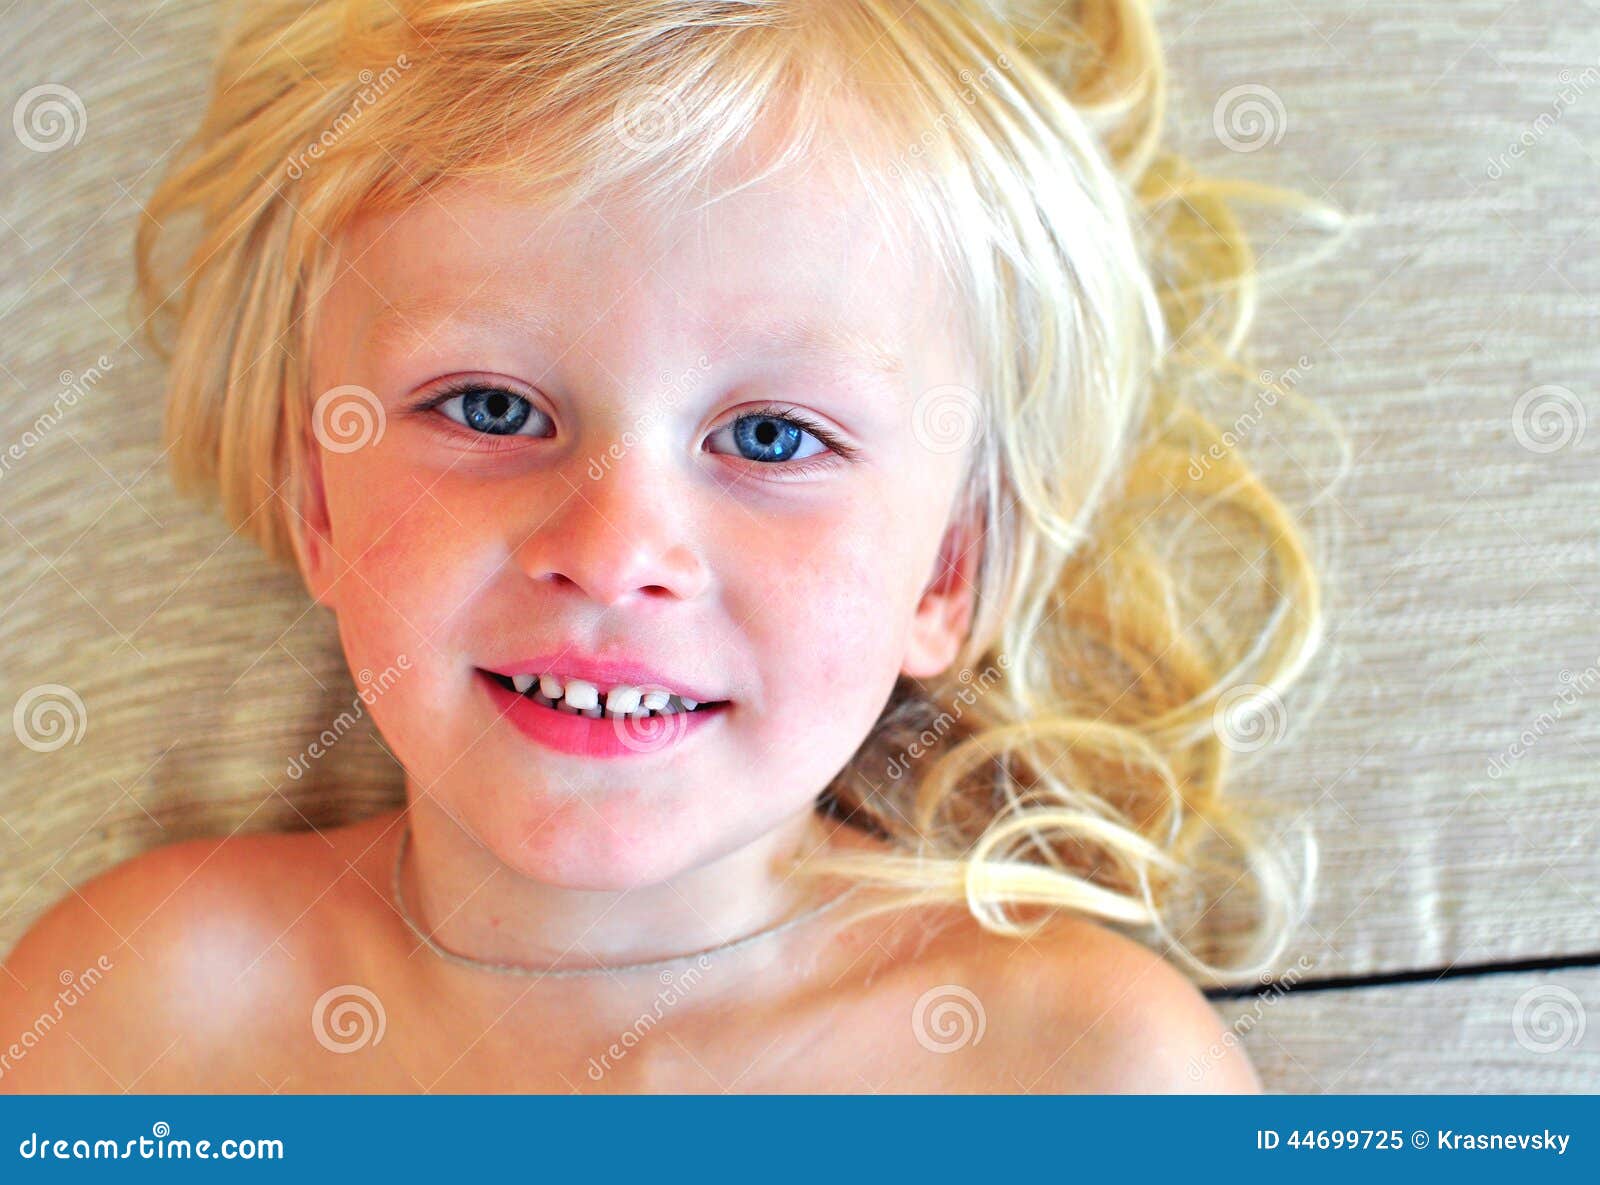 Cute Toddler Boy with Blonde Hair and Freckles - wide 6